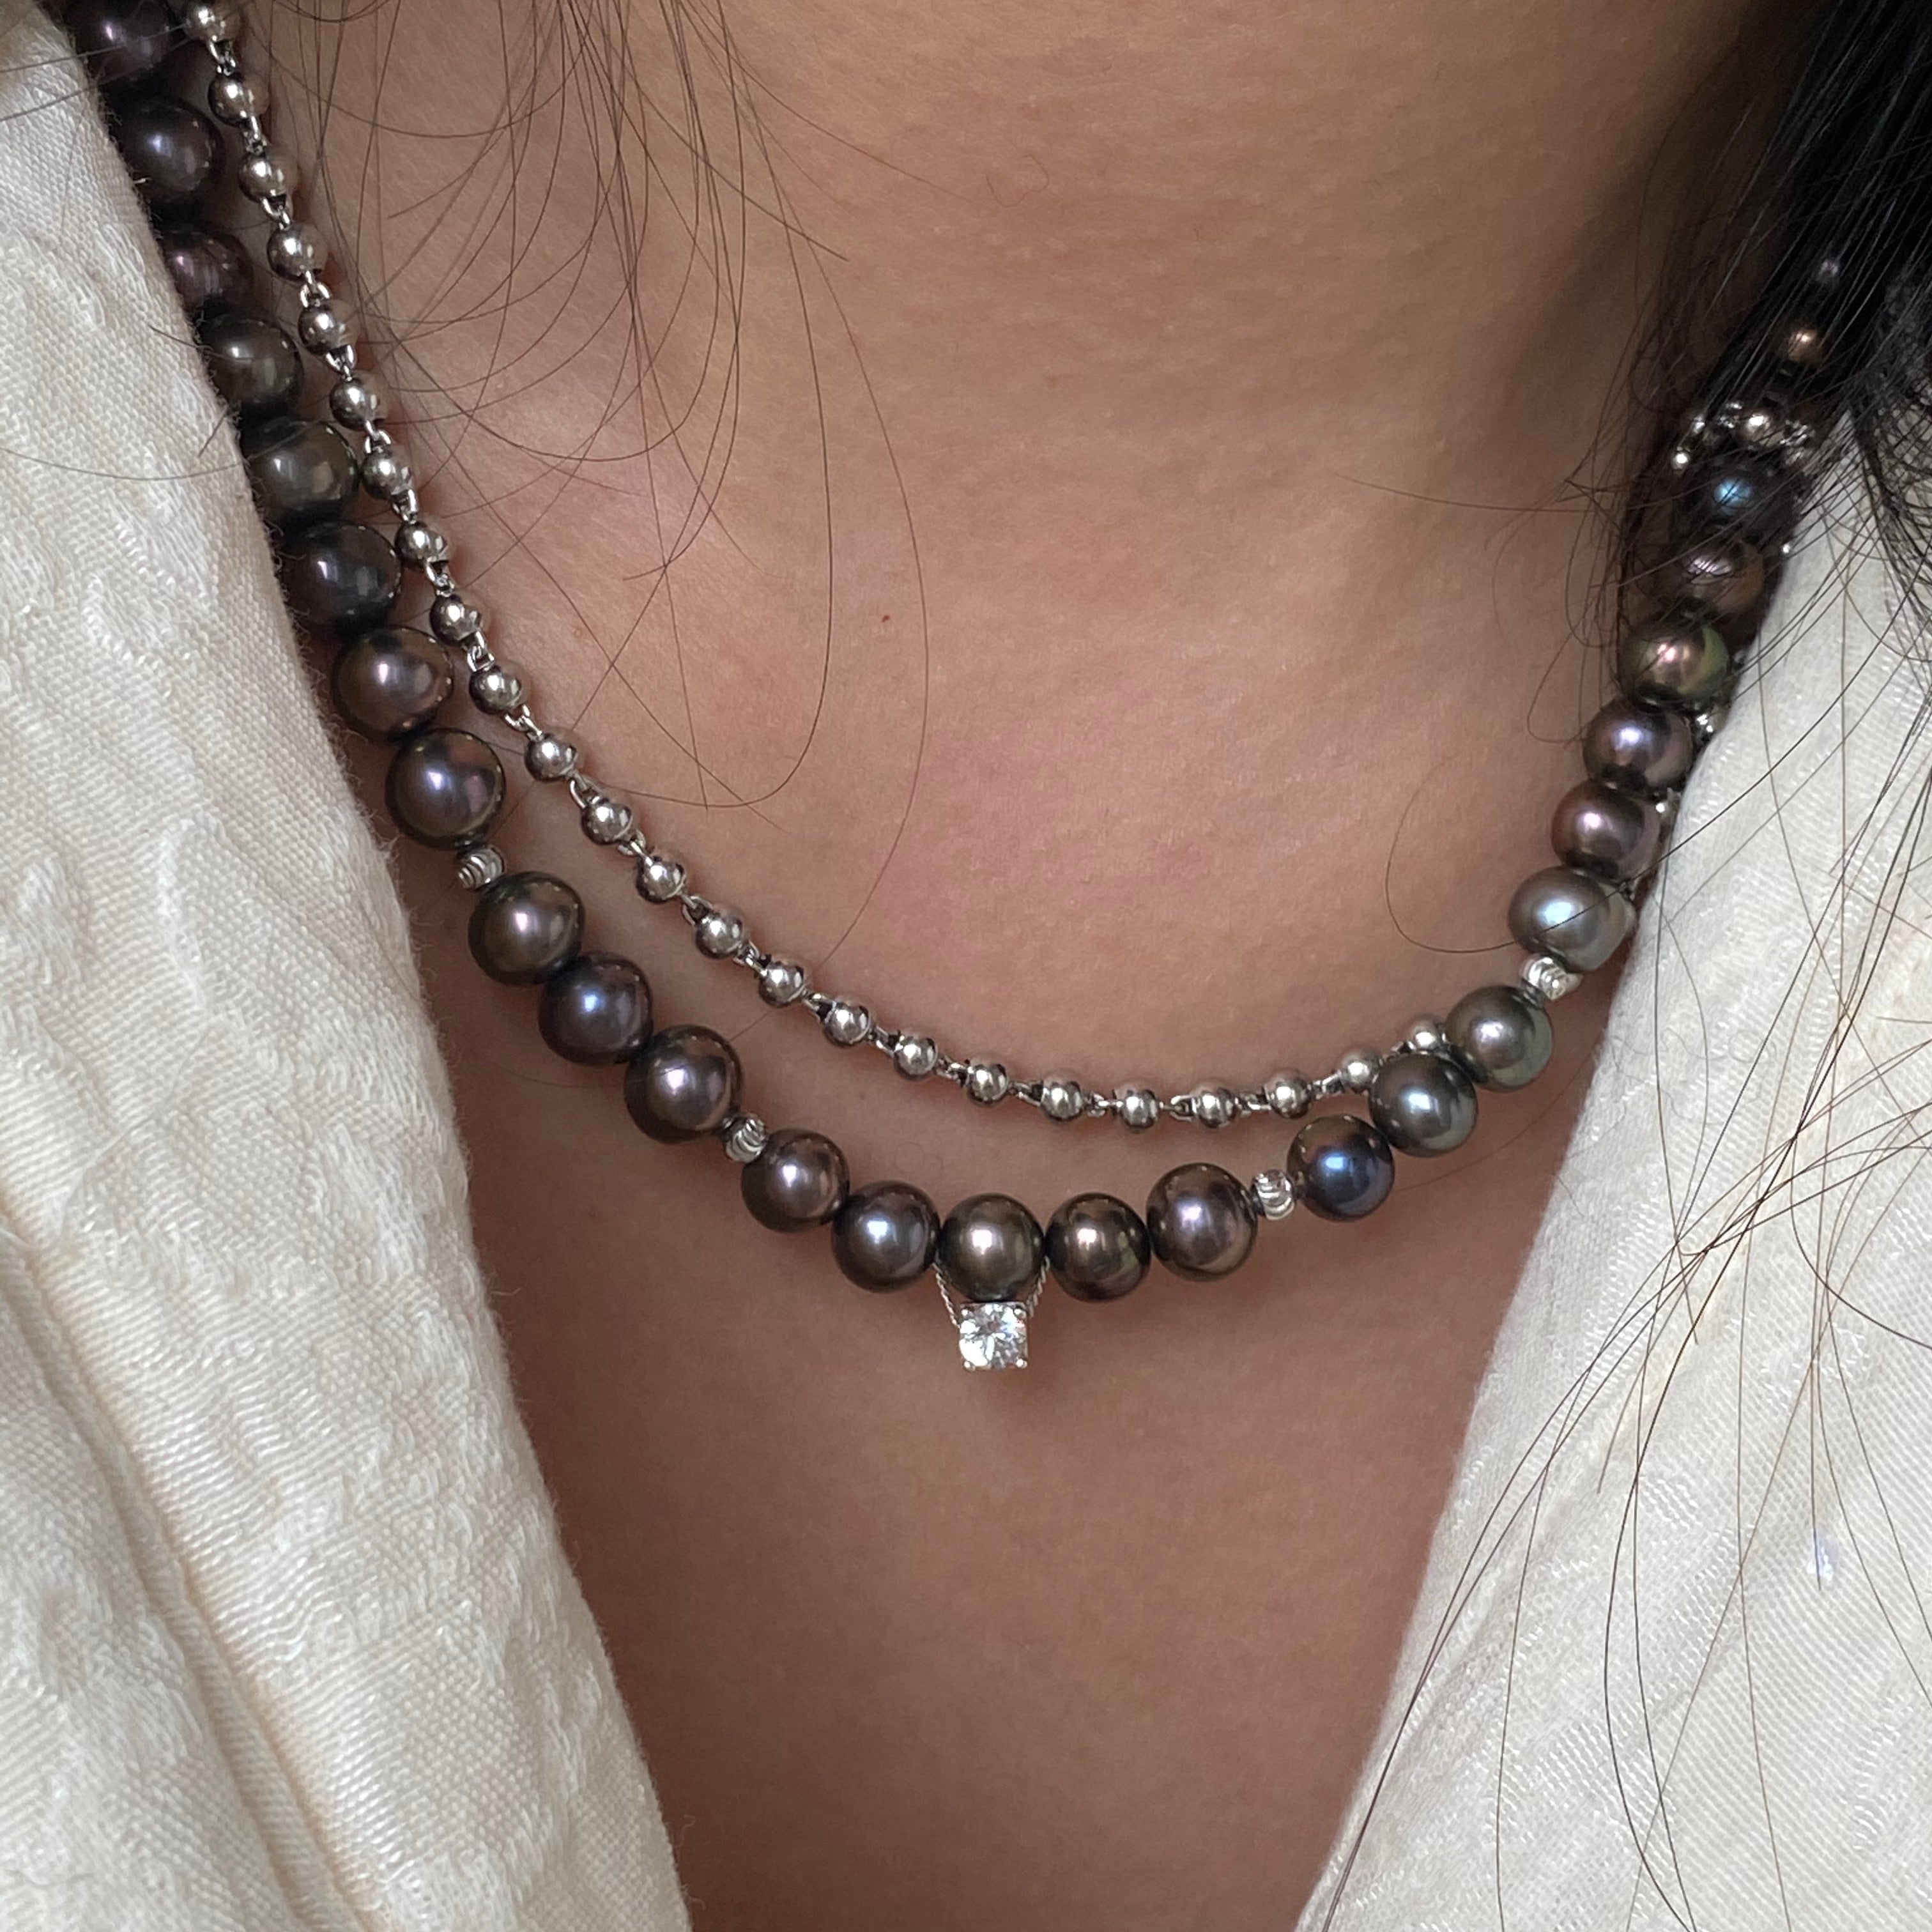 S925 Silver Shiny Black Pearl Handmade Necklace/ Clavicle Chain/ Unisex